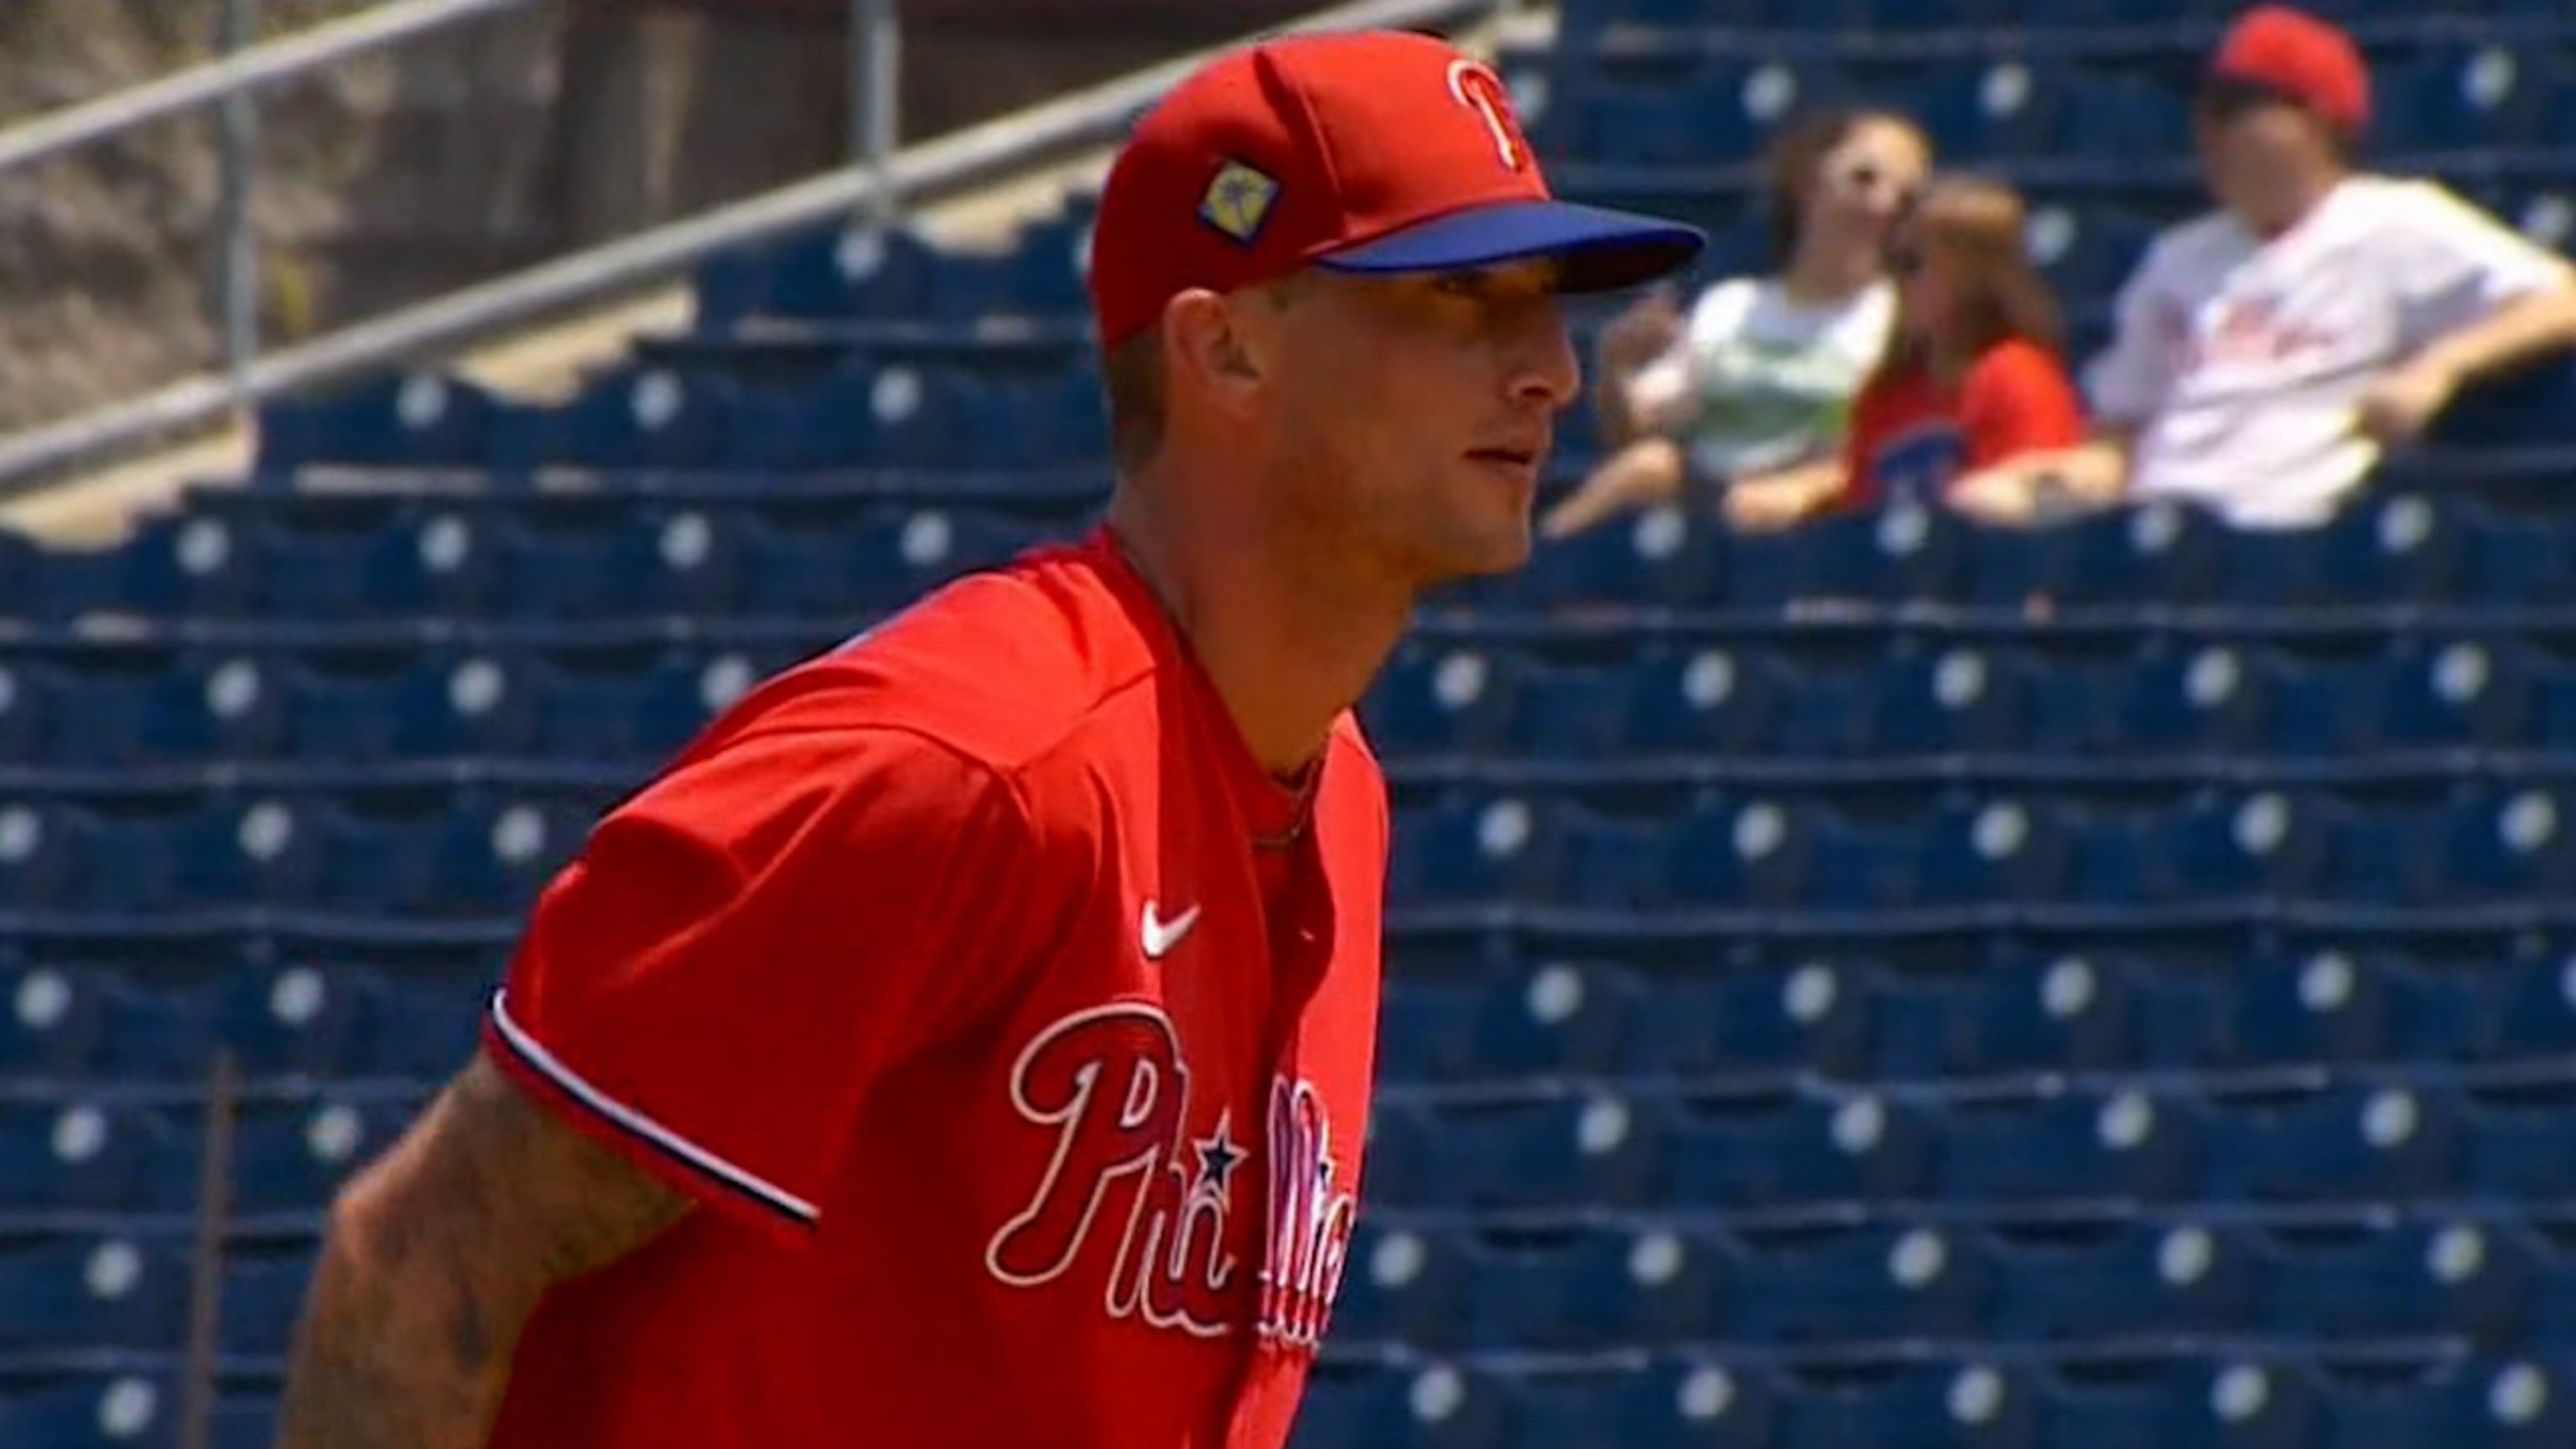 Phillies Opening Day Roster! - Edge of Philly Sports Network